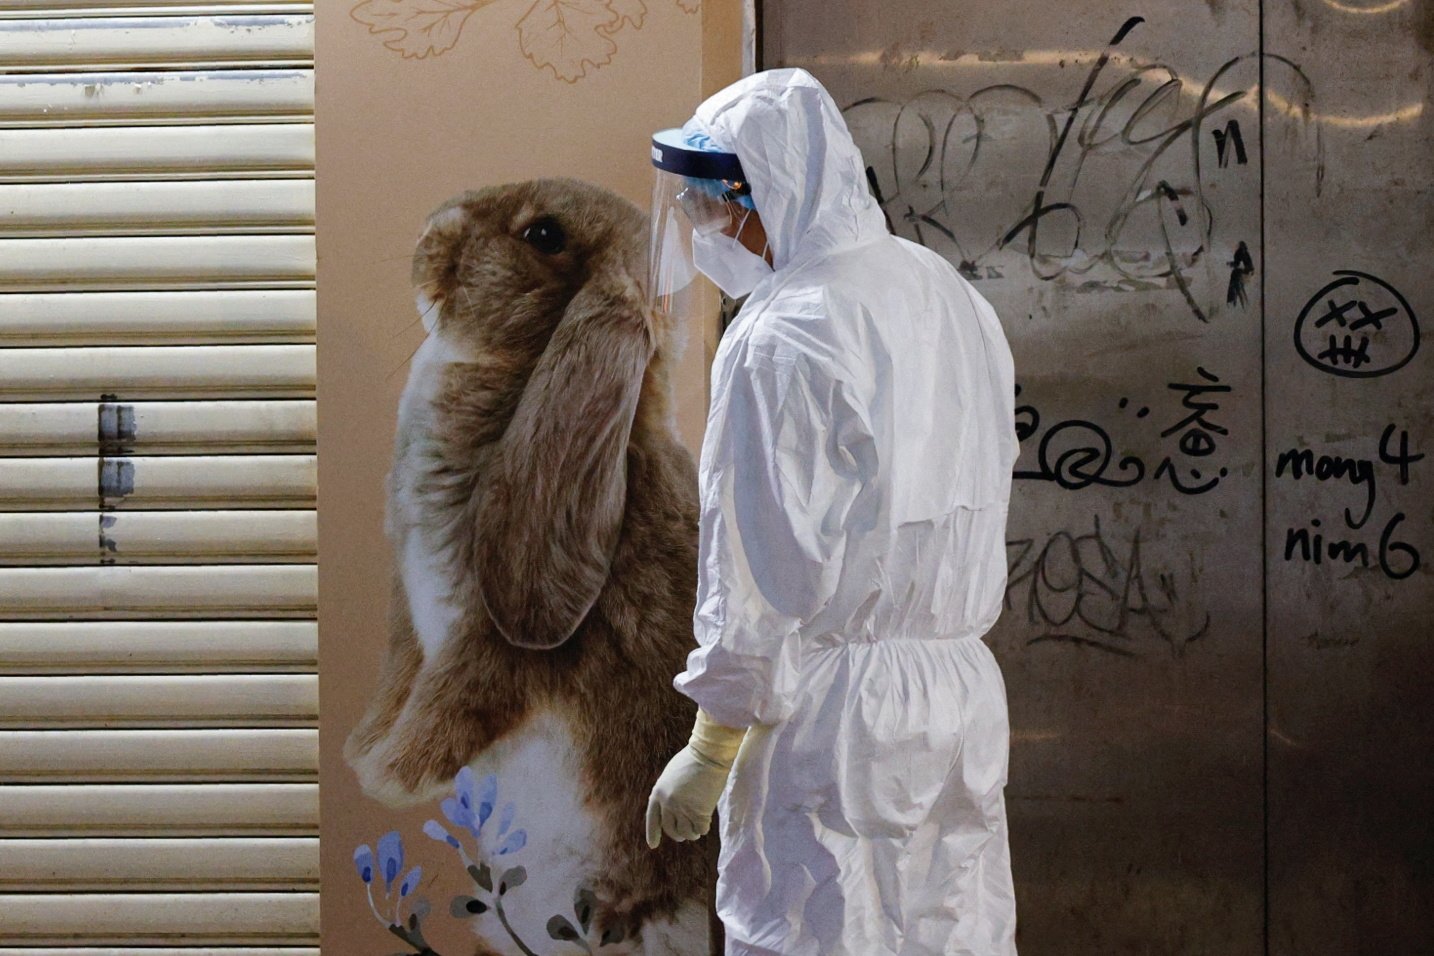 A wildlife officer with personal protective equipment is seen outside a temporarily closed pet shop, after the government announced to euthanize around 2,000 hamsters in the city after finding evidence for the first time of possible animal-to-human transmission of coronavirus, in Hong Kong, China, Jan. 18, 2022. (Reuters Photo)